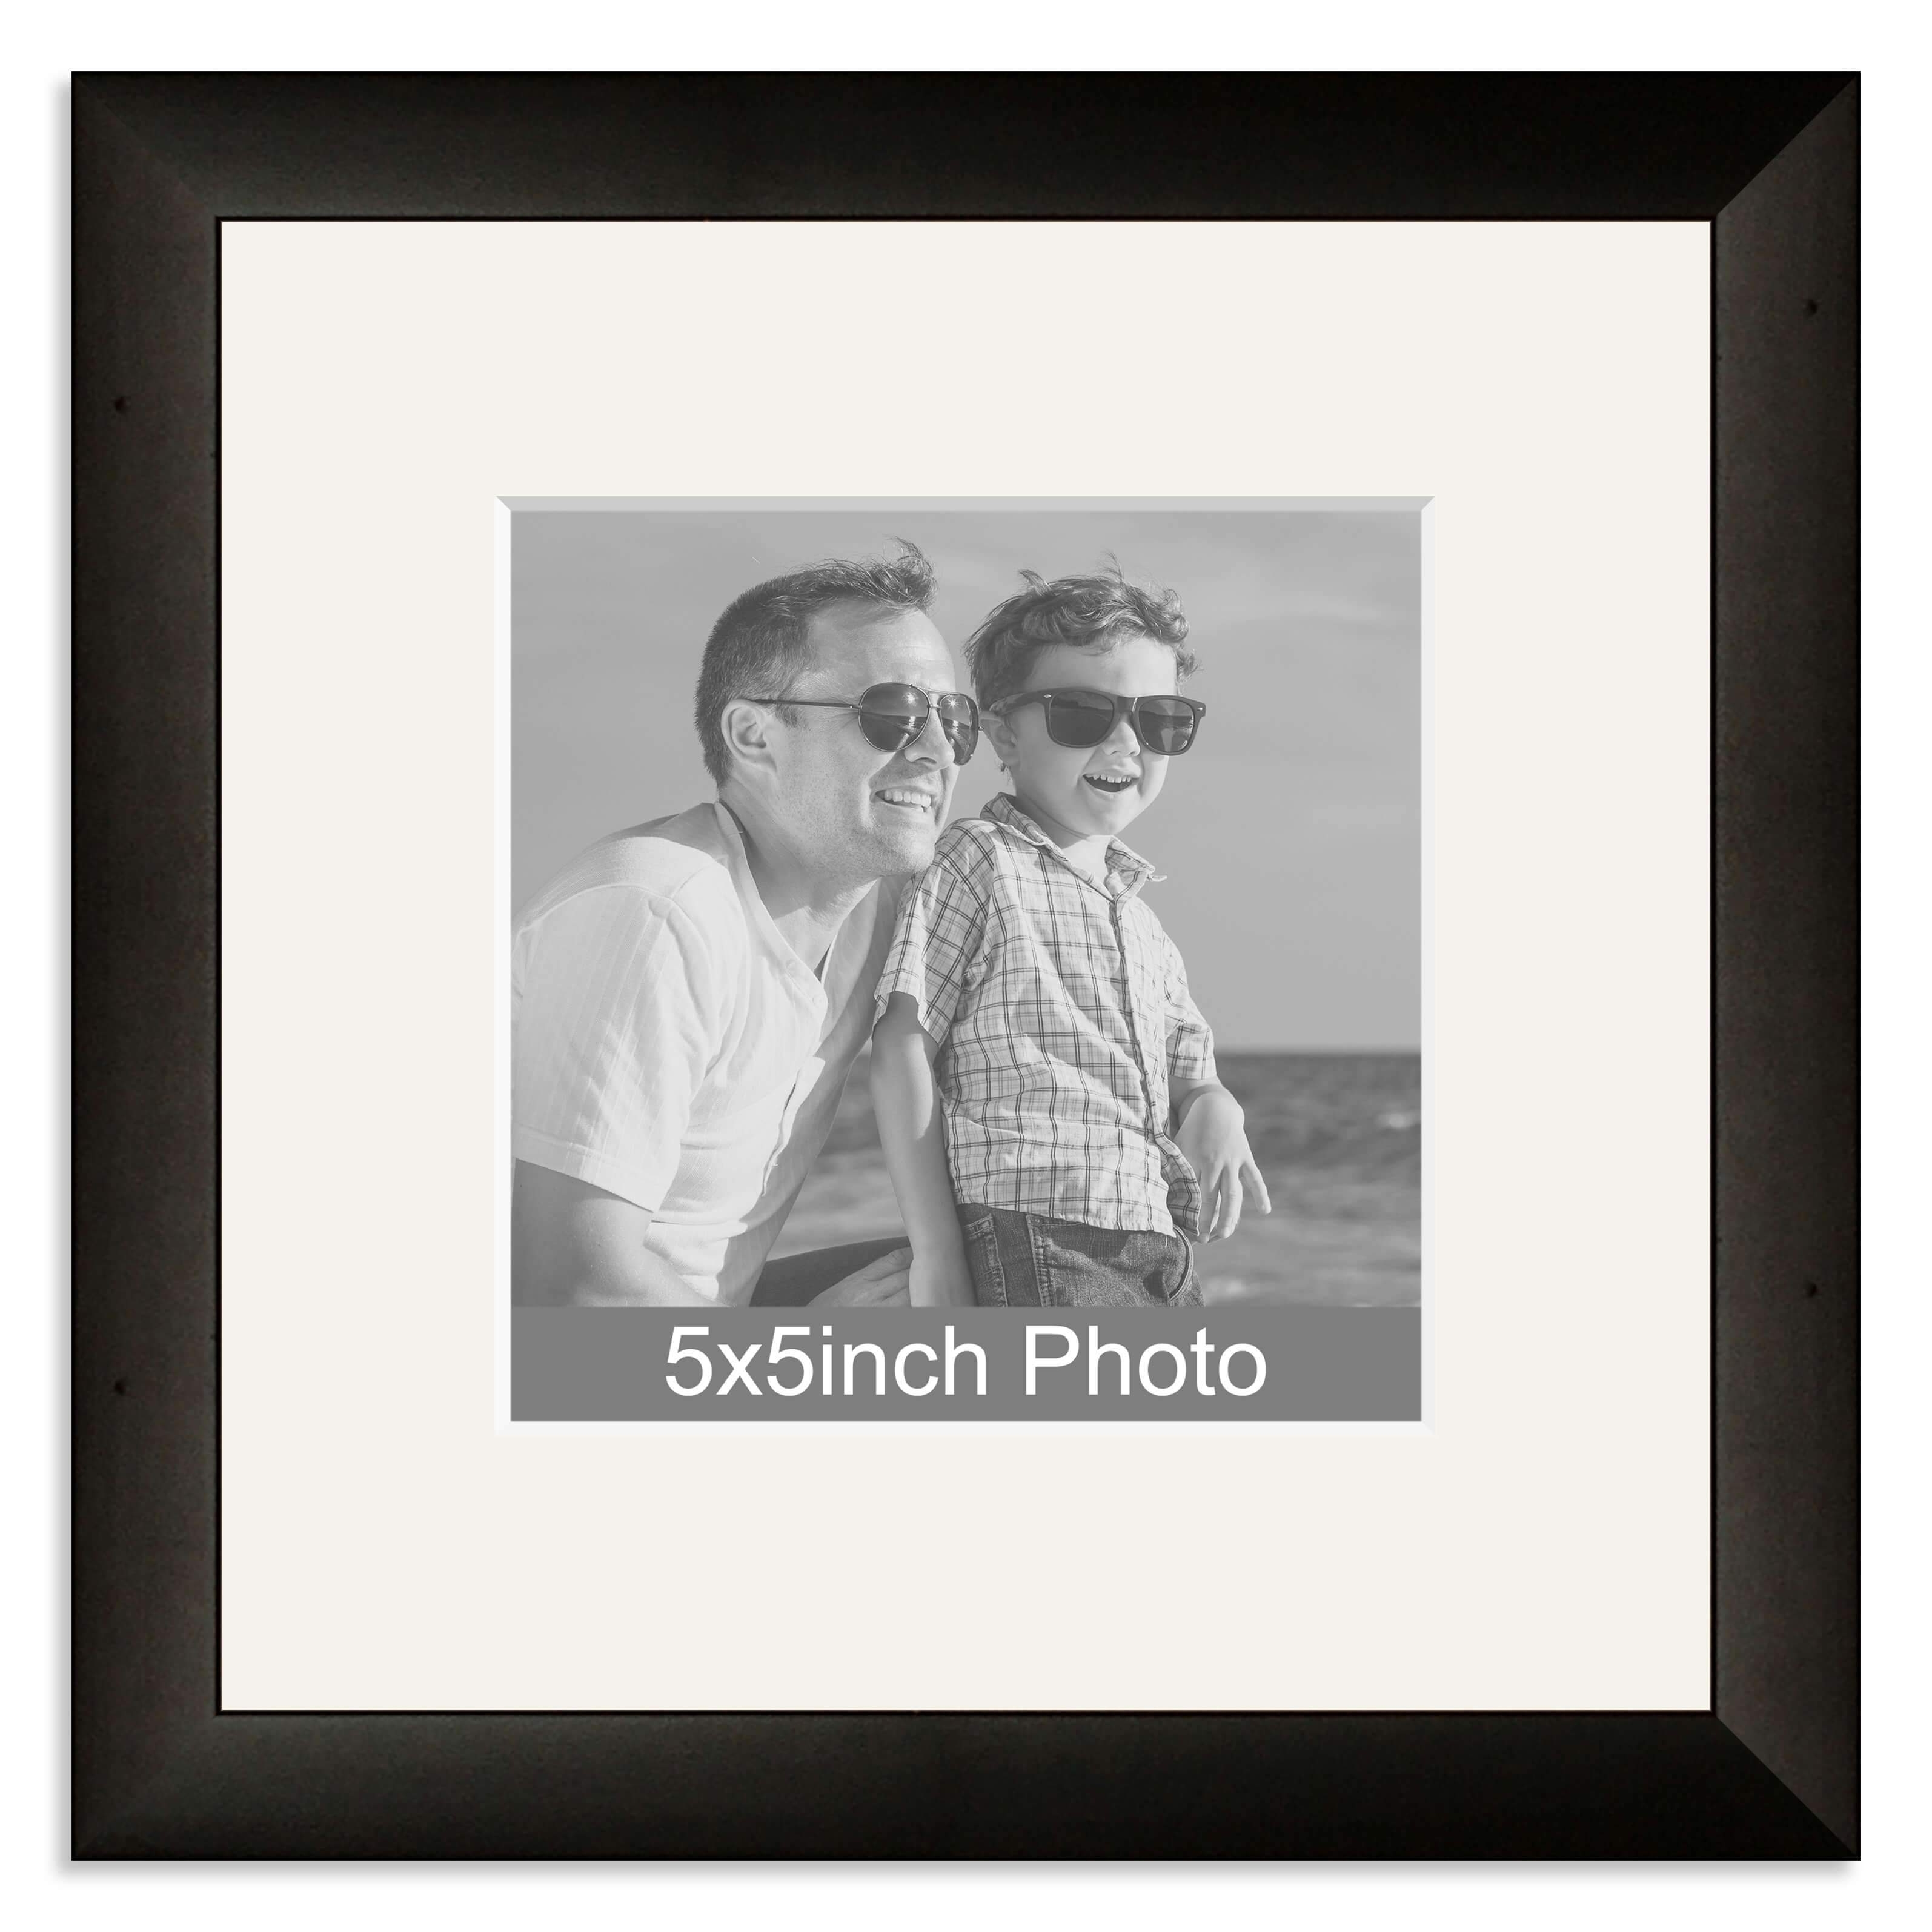 Black Wooden Photo Frame with mount for a 5x5in Photo – Photo to follow by email